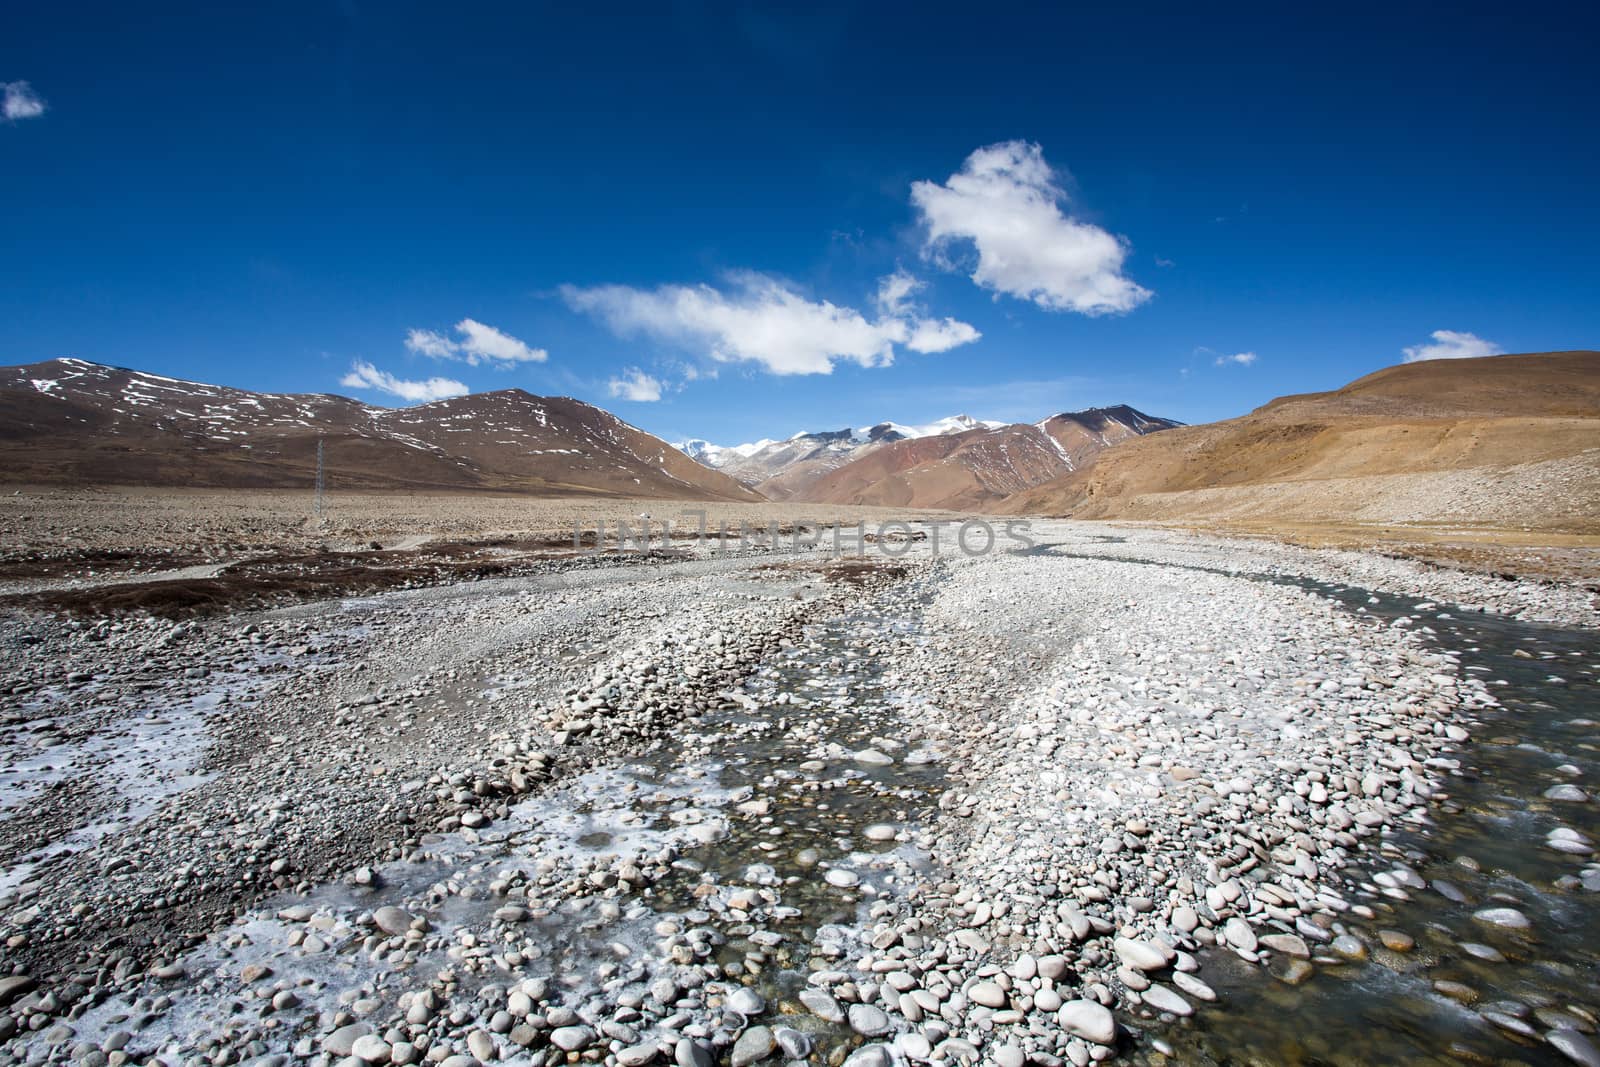 Landscape along the Friendship Highway between Tibet and Nepal